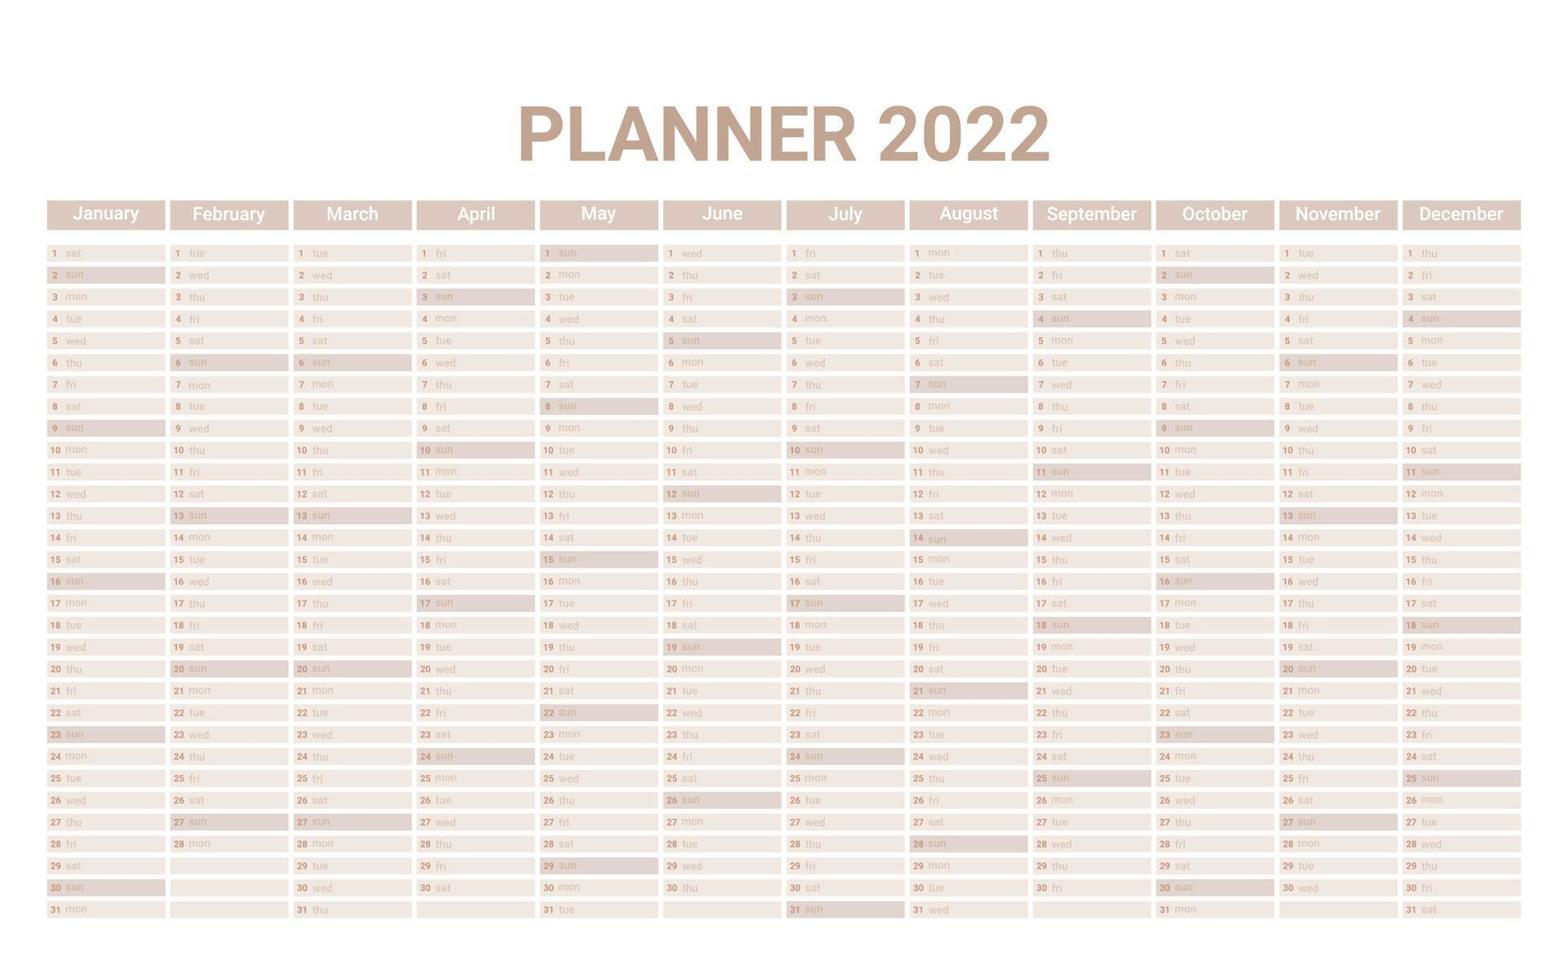 Planner English calendar of 2022 year, template schedule calender with 12 vertical months on one page. Wall organizer, yearly planner template. Vector illustration